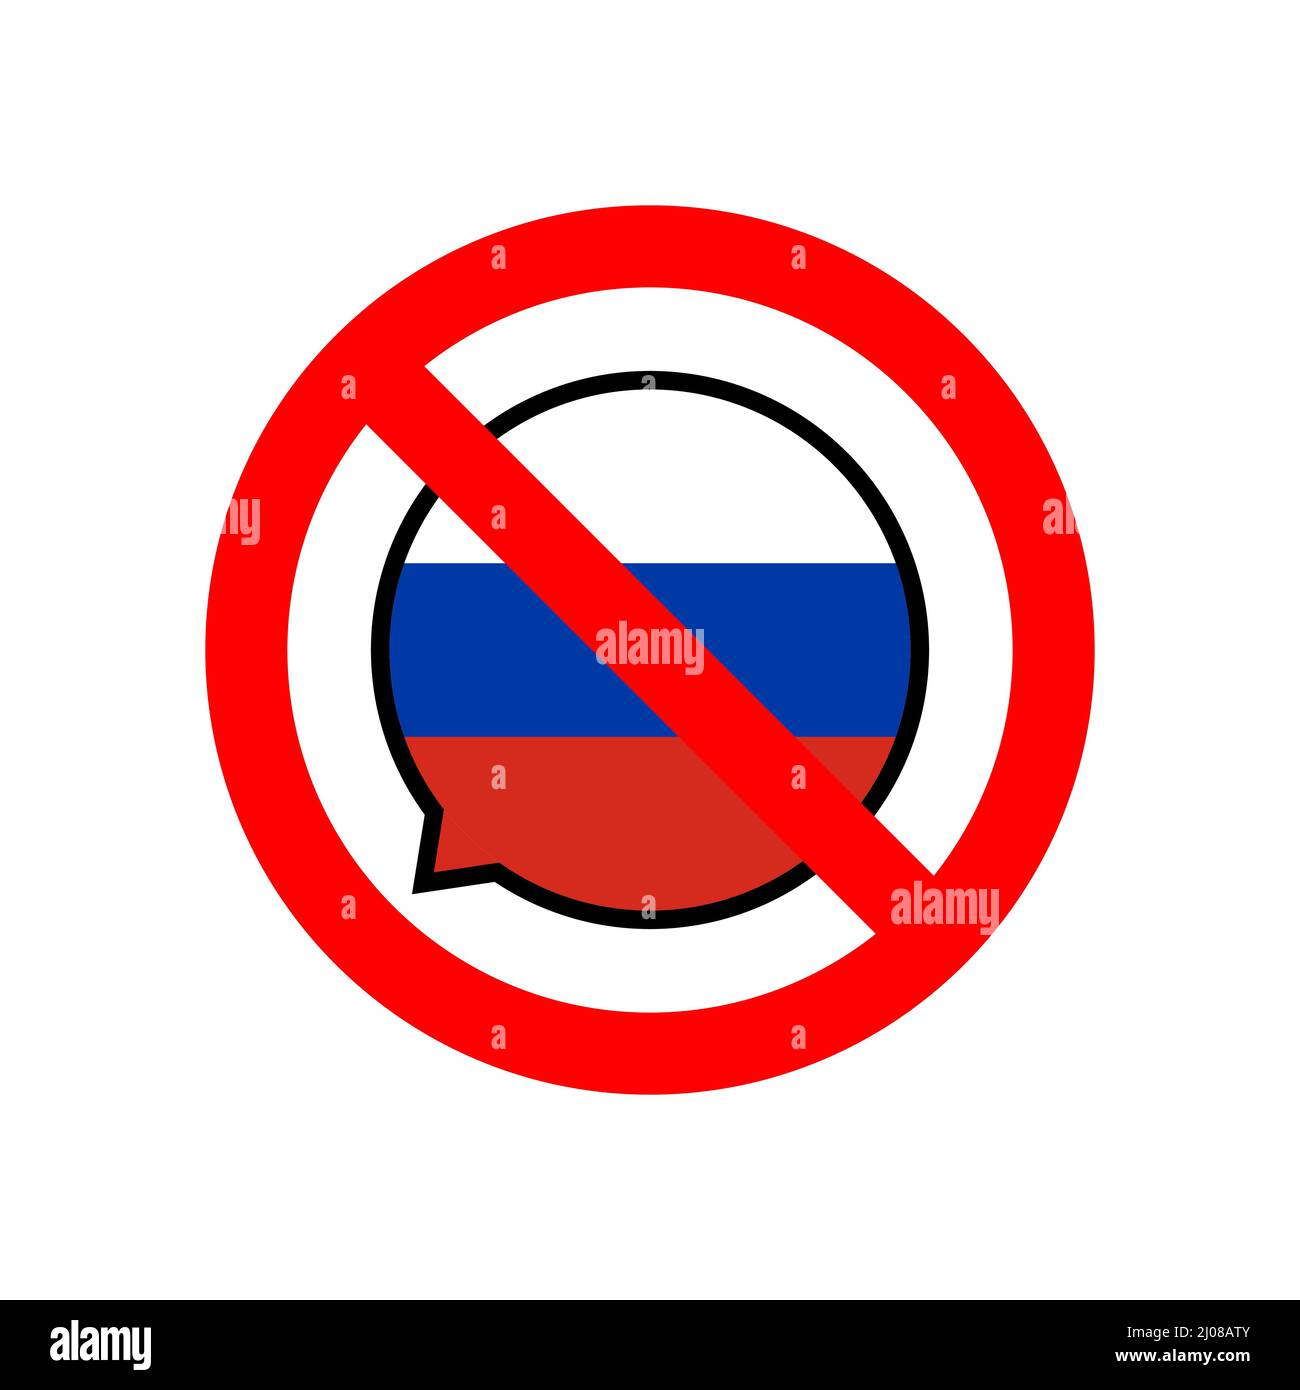 Idon't speak russian. Prohibition sign with russian flag inside Stock Vector